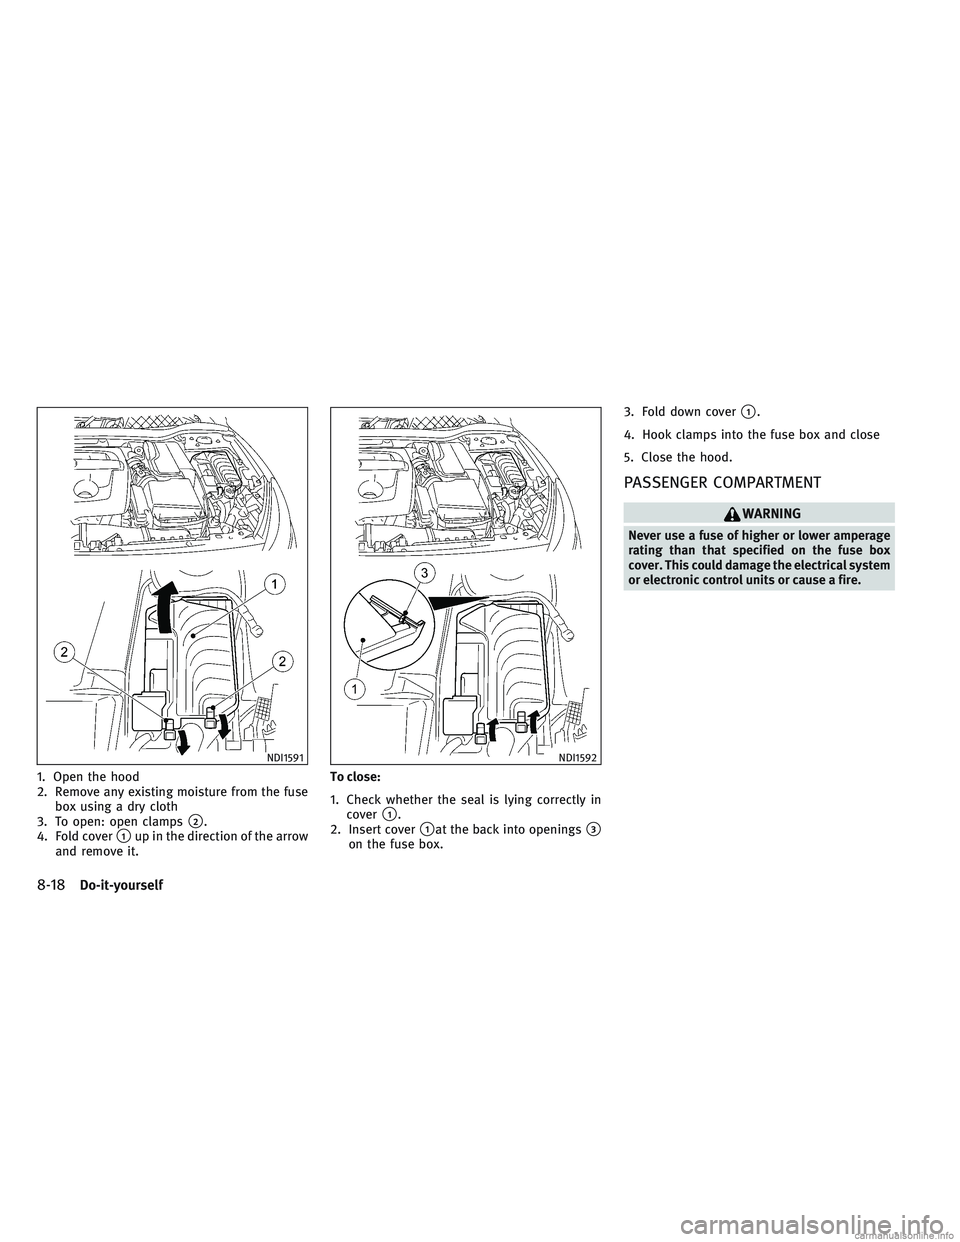 INFINITI QX30 2017  Owners Manual 1. Open the hood
2. Remove any existing moisture from the fusebox using a dry cloth
3. To open: open clamps
2.
4. Fold cover
1up in the direction of the arrow
and remove it. To close:
1. Check wheth